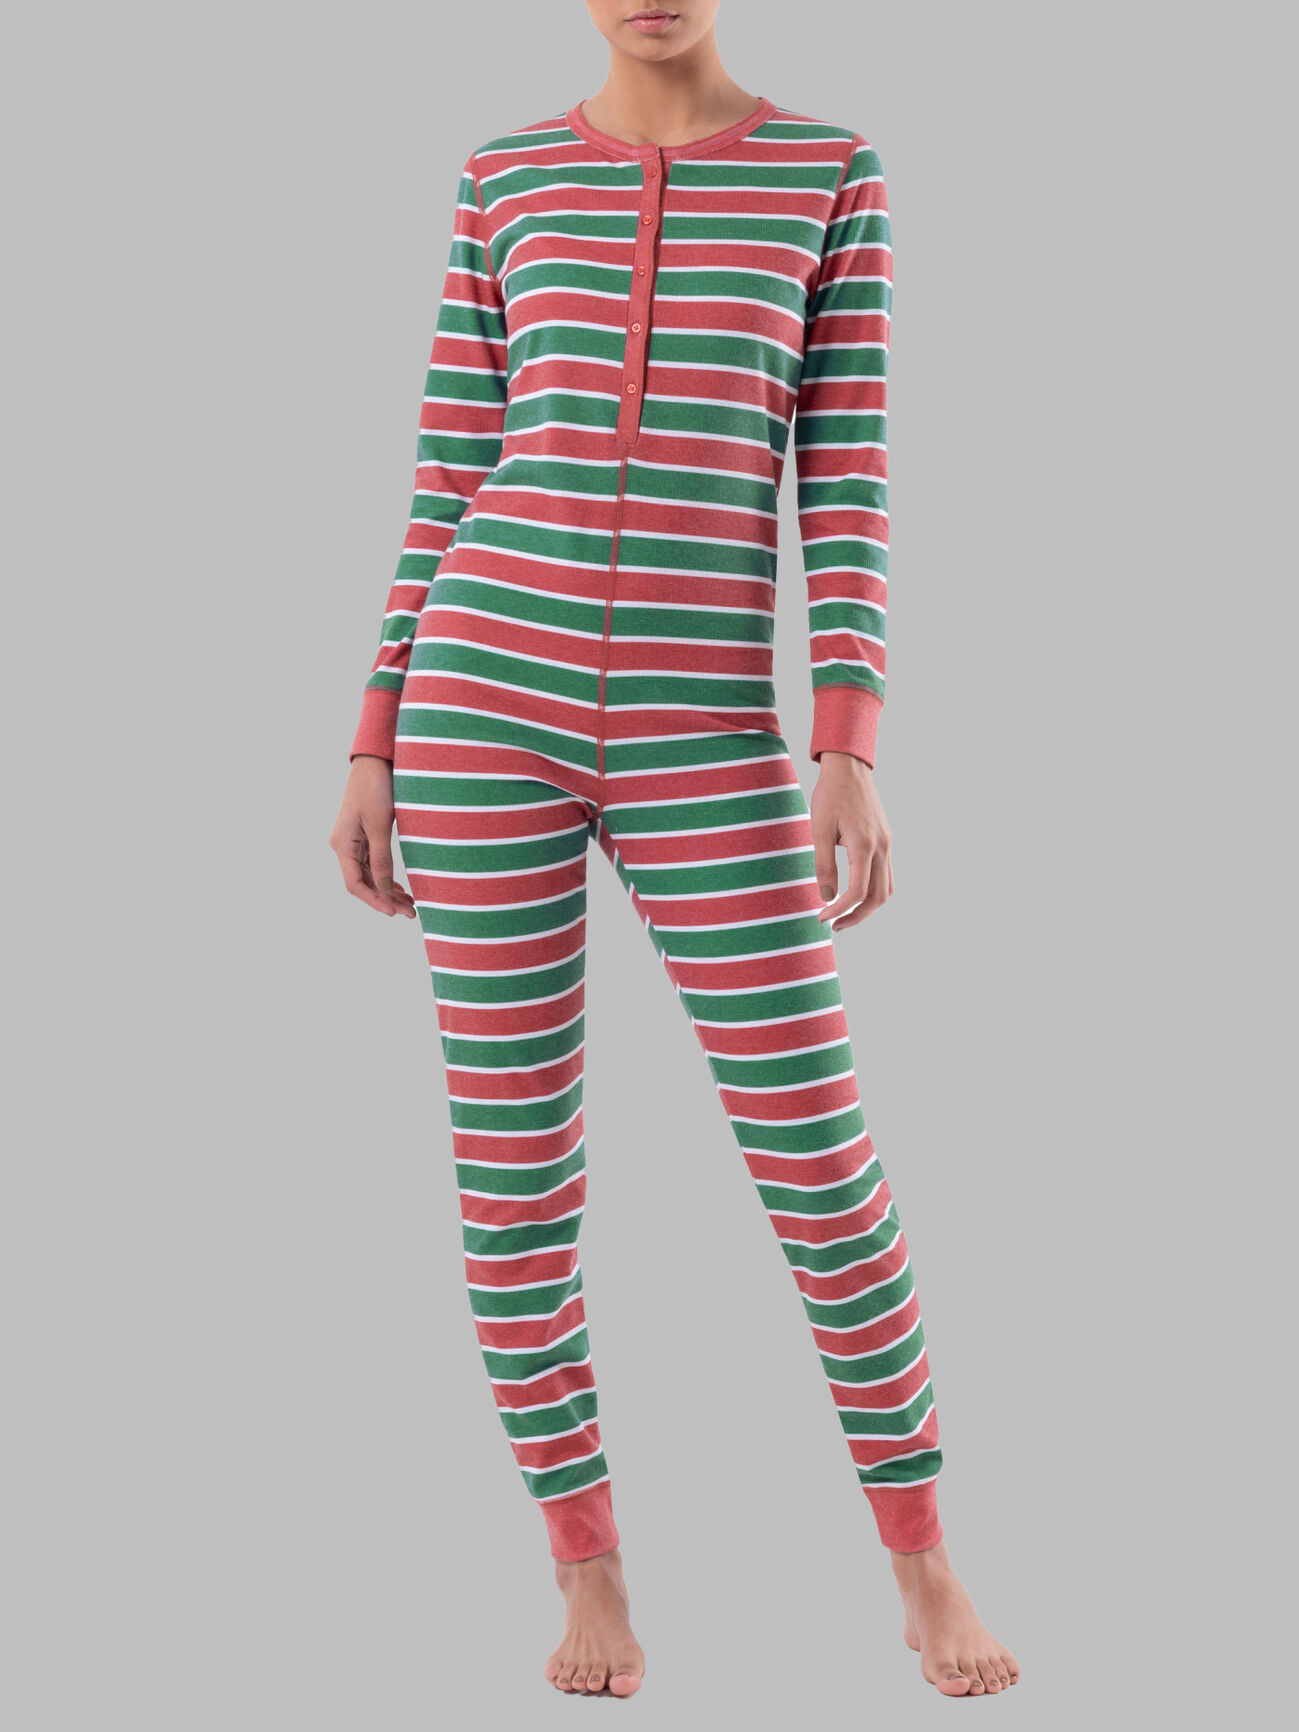 Boys and Girls Soft & Cozy Thermal One- Piece Union Suit